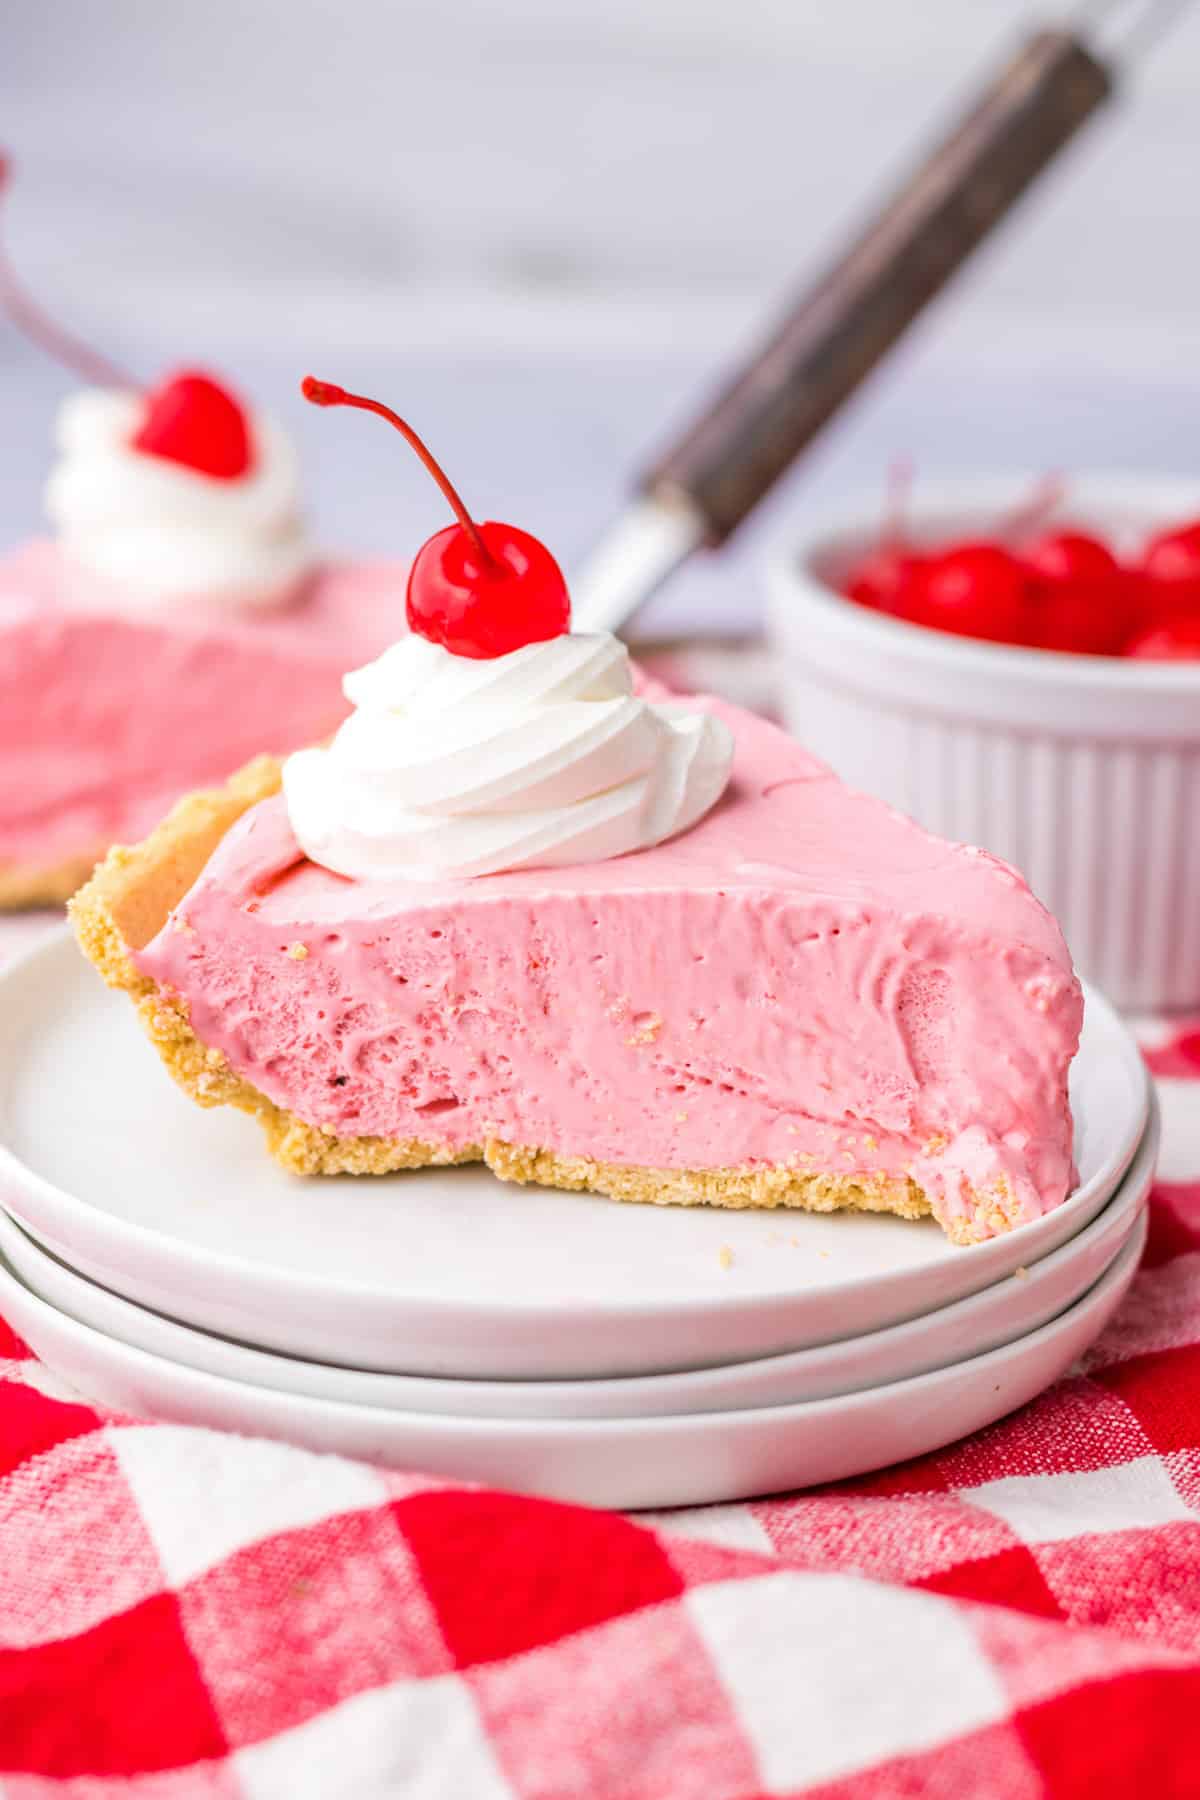 Slice of no bake kool aid pie with cool whip and cherry on top.